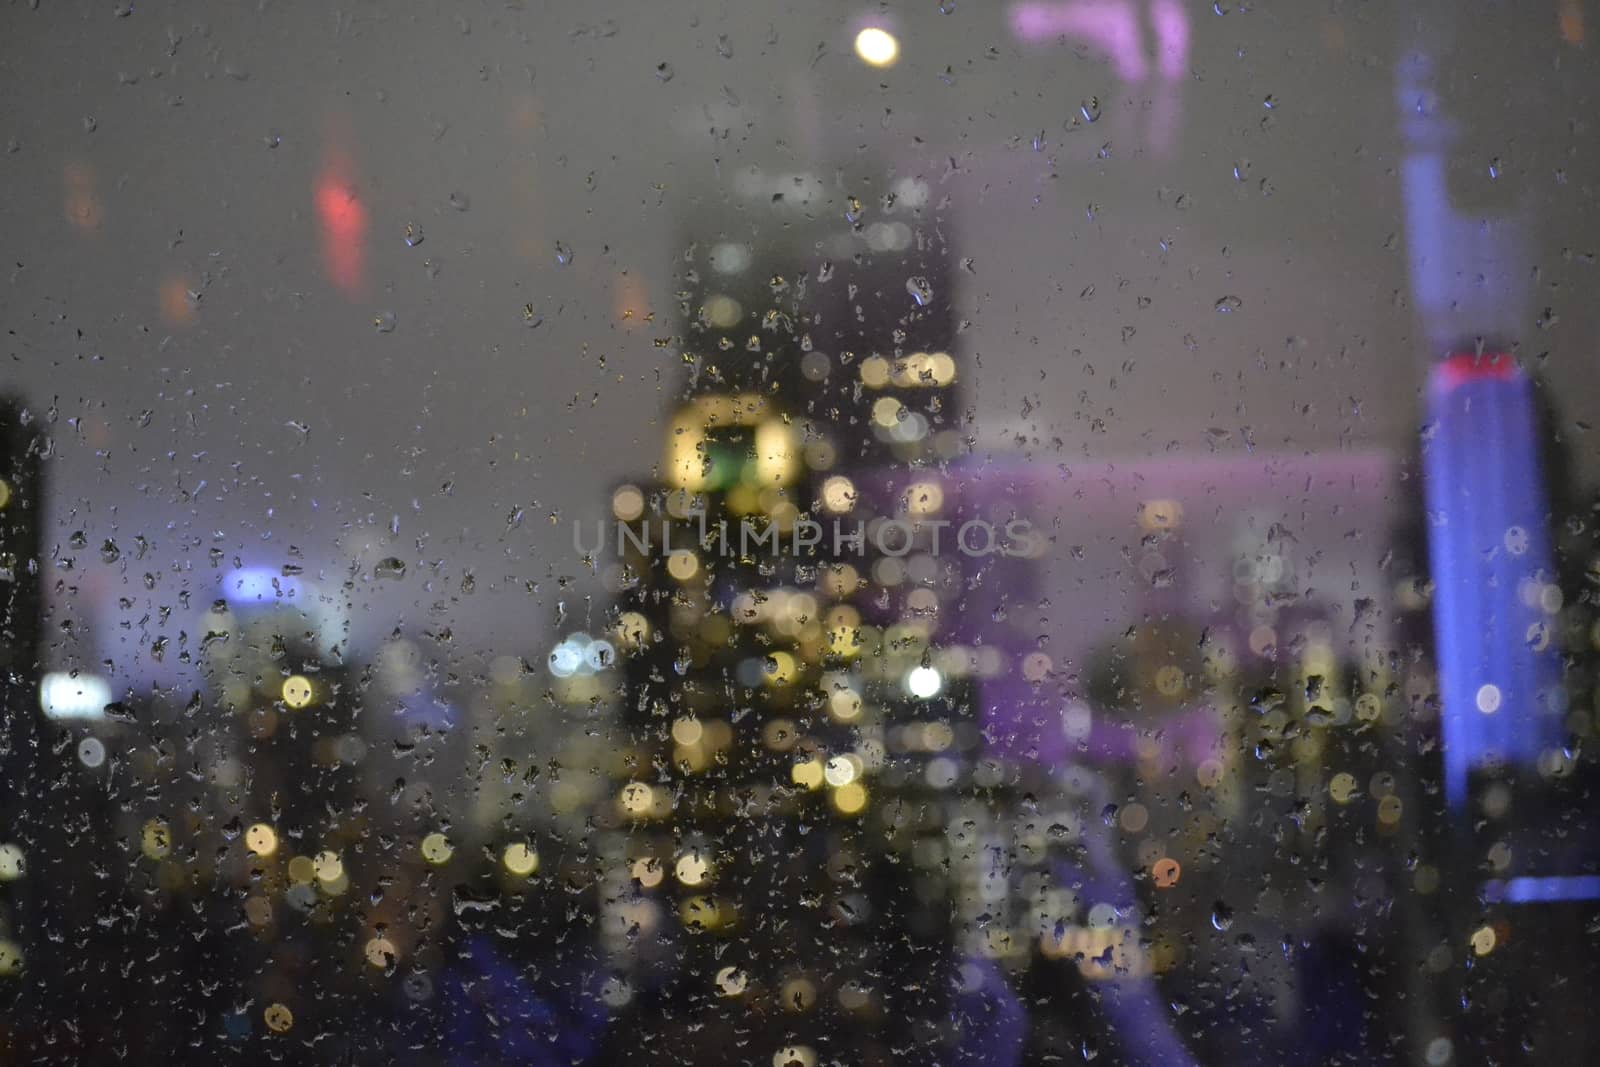 Empire State in the background on a photography focused on a wet glass after a storm